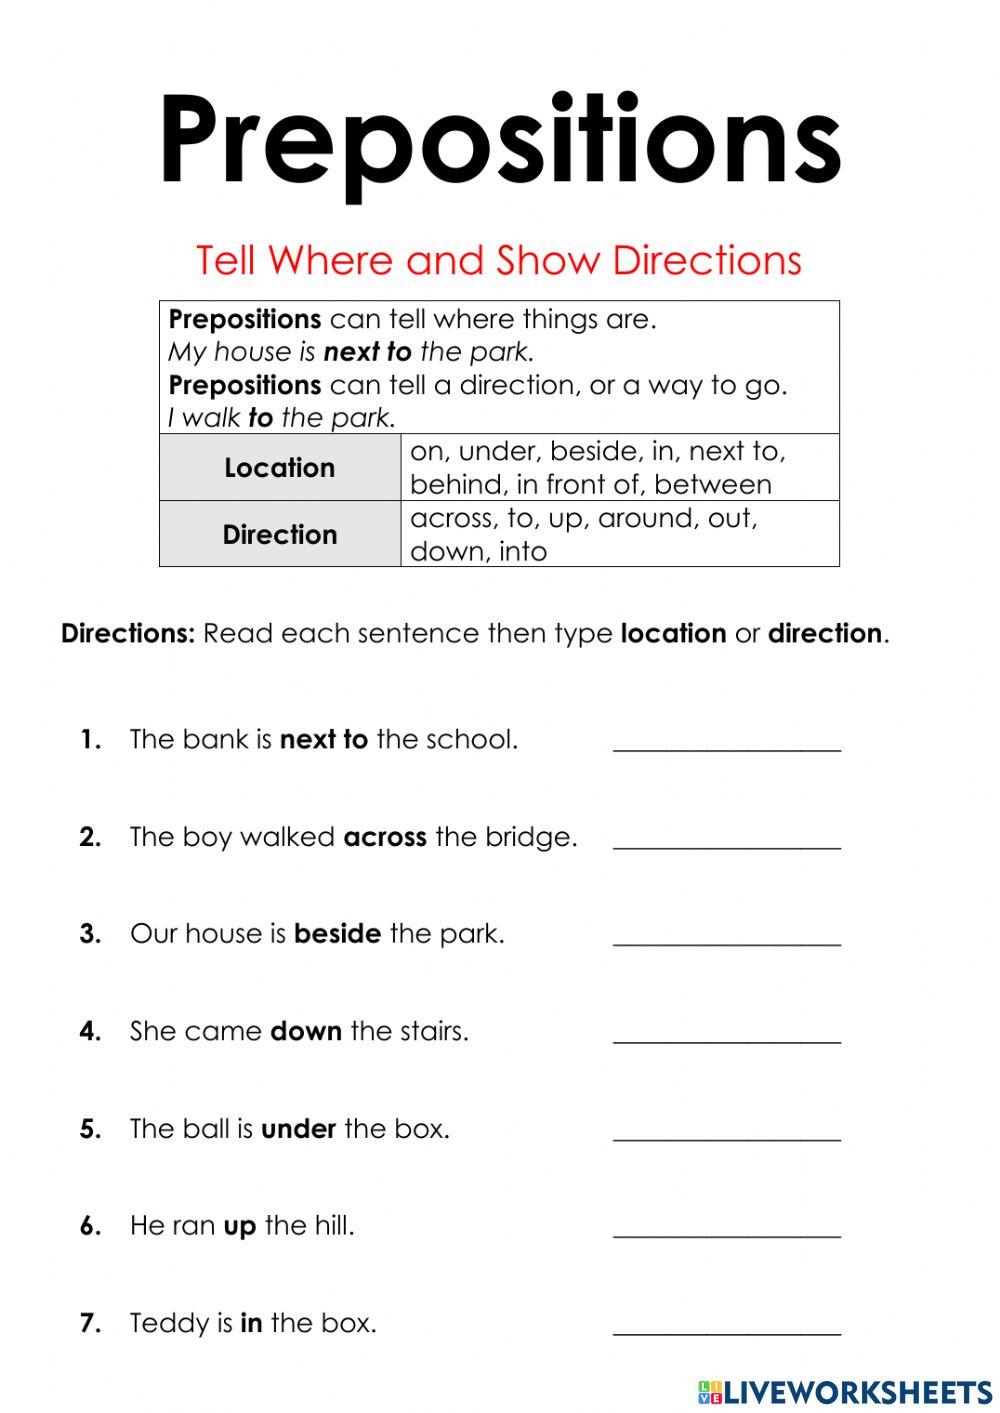 Prepositions of Directions and Locations